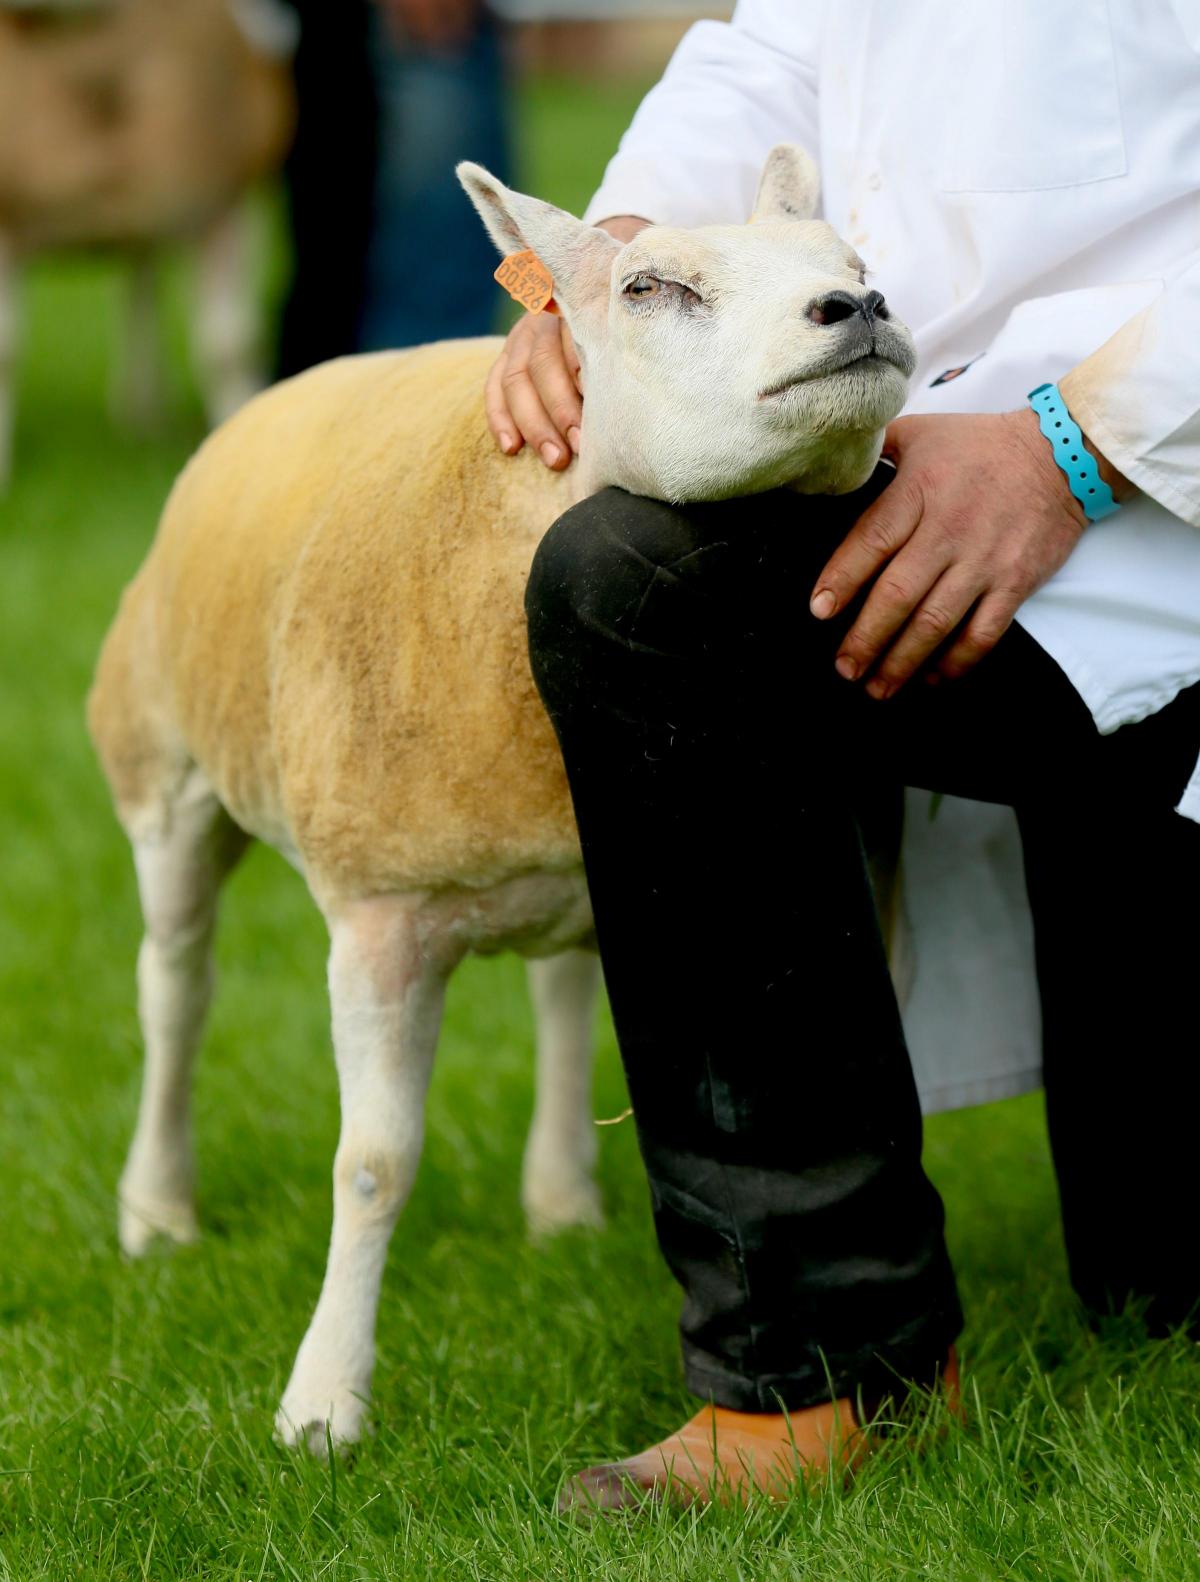 Great Yorkshire Show 2016